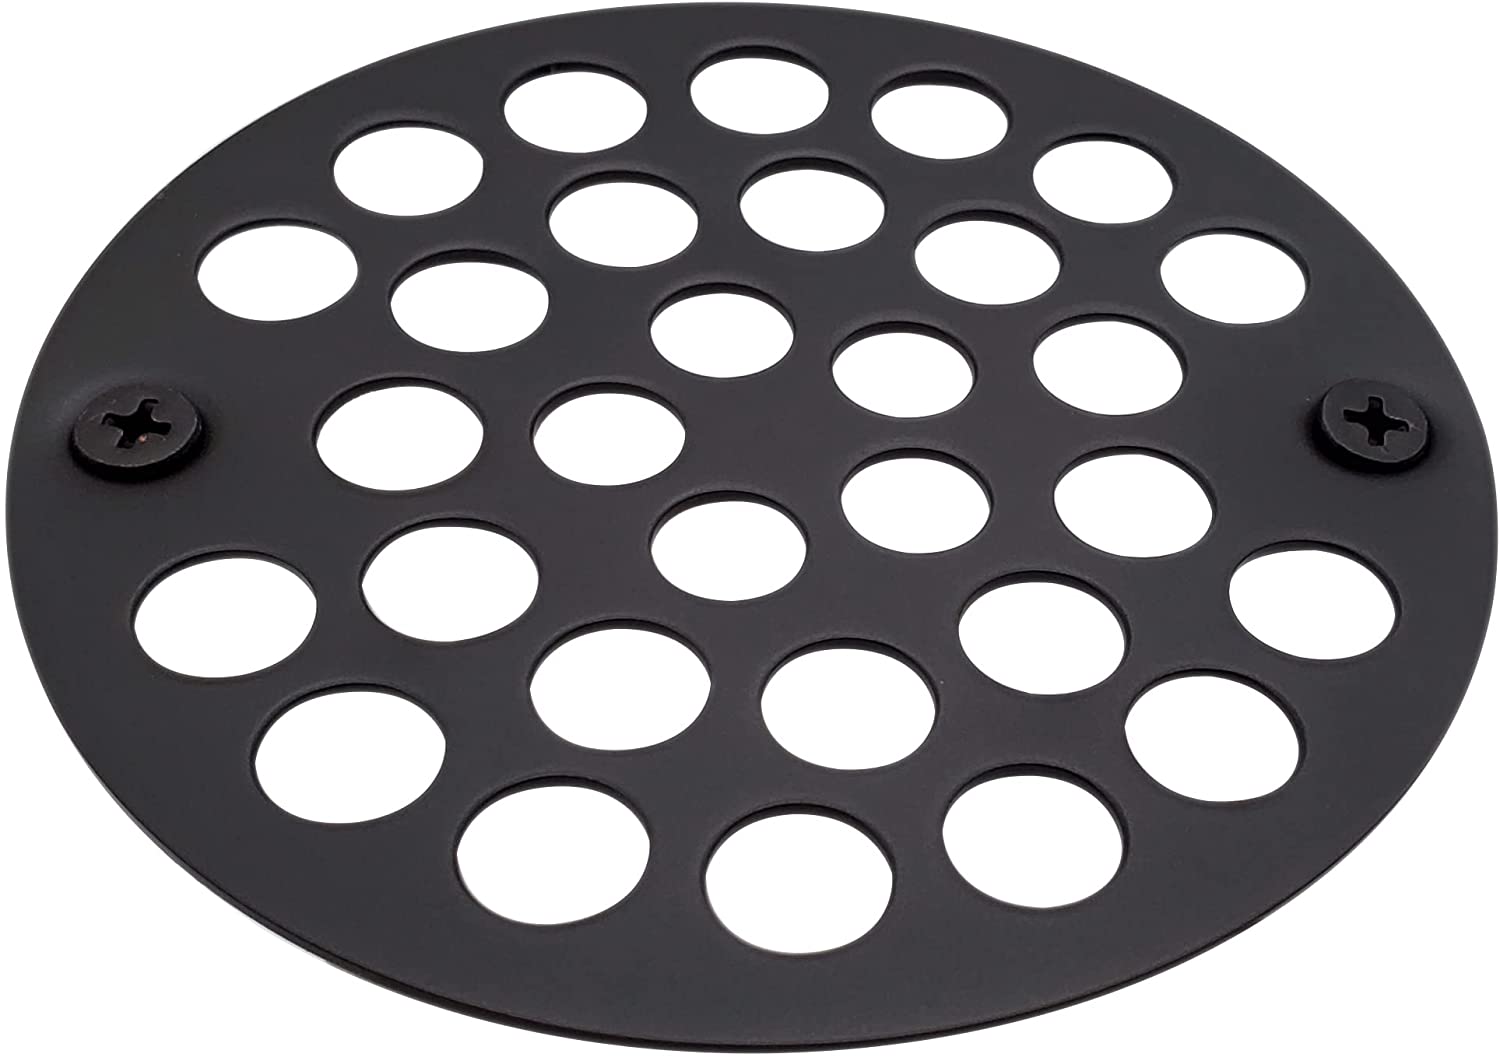 Shower Drain Cover, Brass Construction, 4-1/4 inches outside diameter (Oil  Rubbed Bronze), 5 H 0.25 L 5 W - Fry's Food Stores